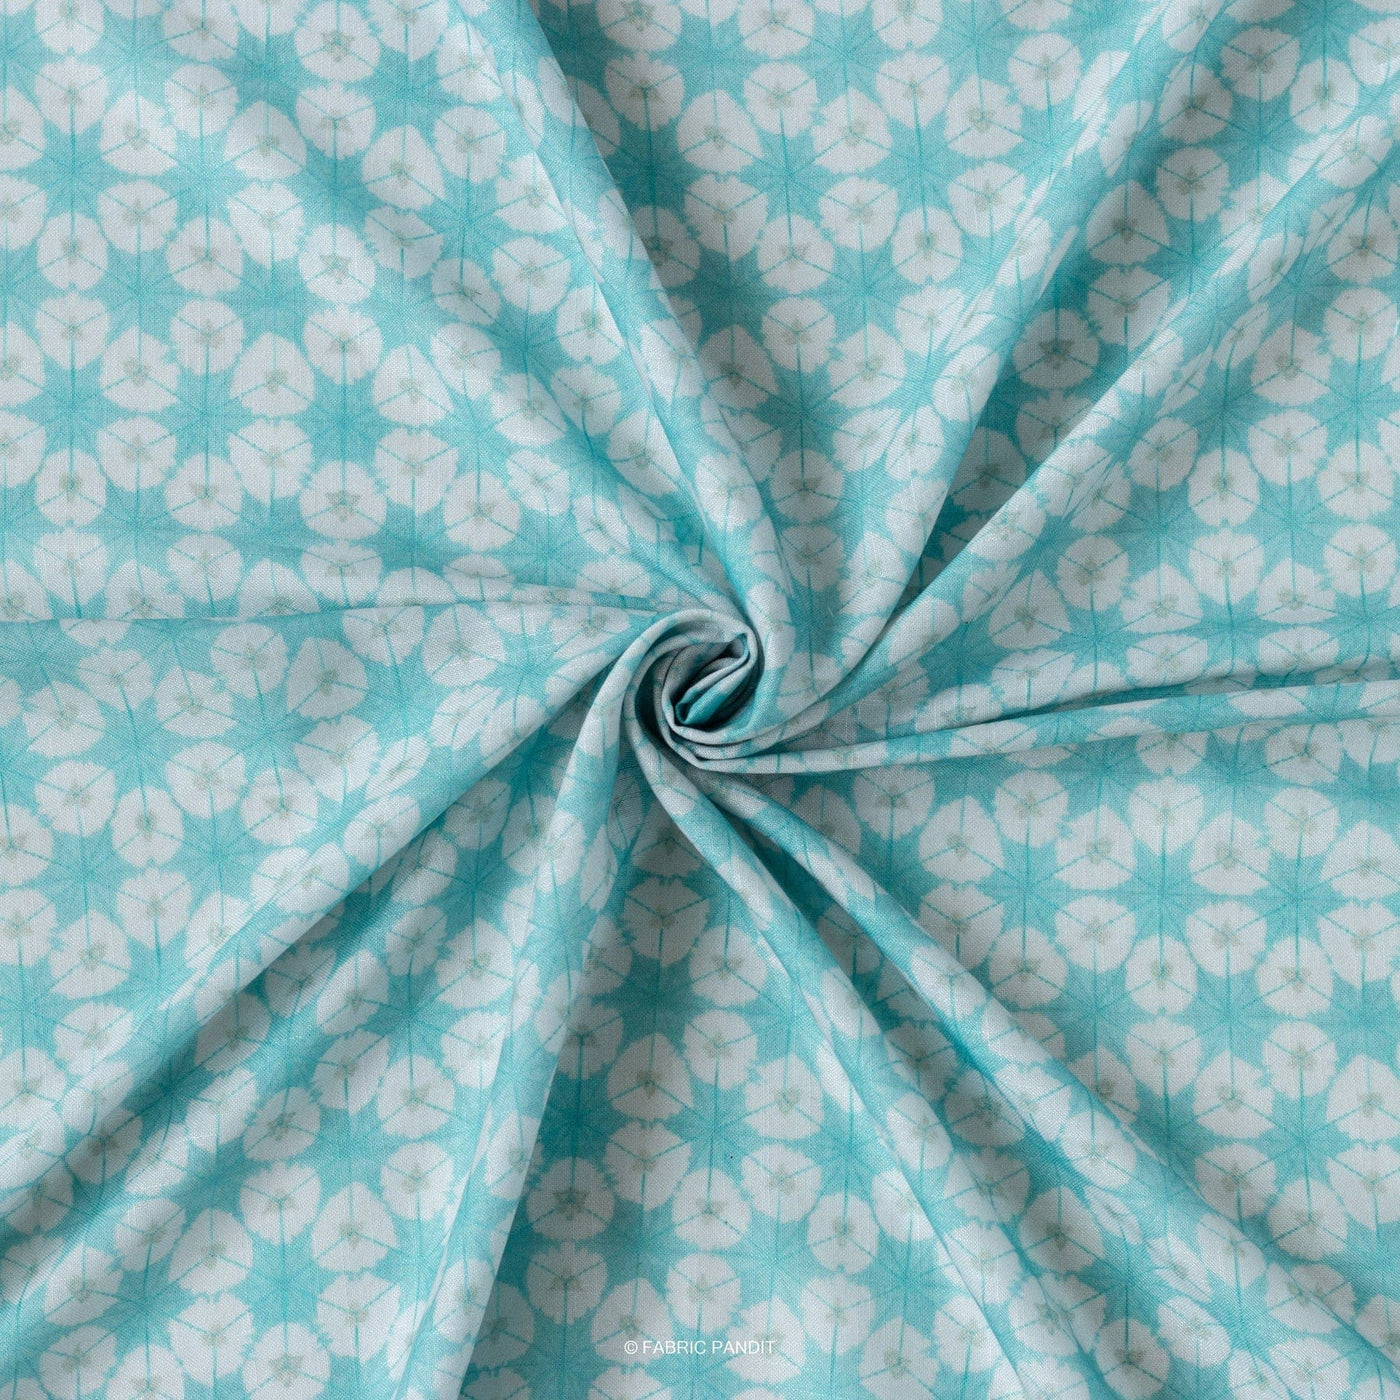 Fabric Pandit Fabric Light Turquoise And White Abstract Pattern Digital Printed Linen Blend Slub Fabric (Width 44 Inches)